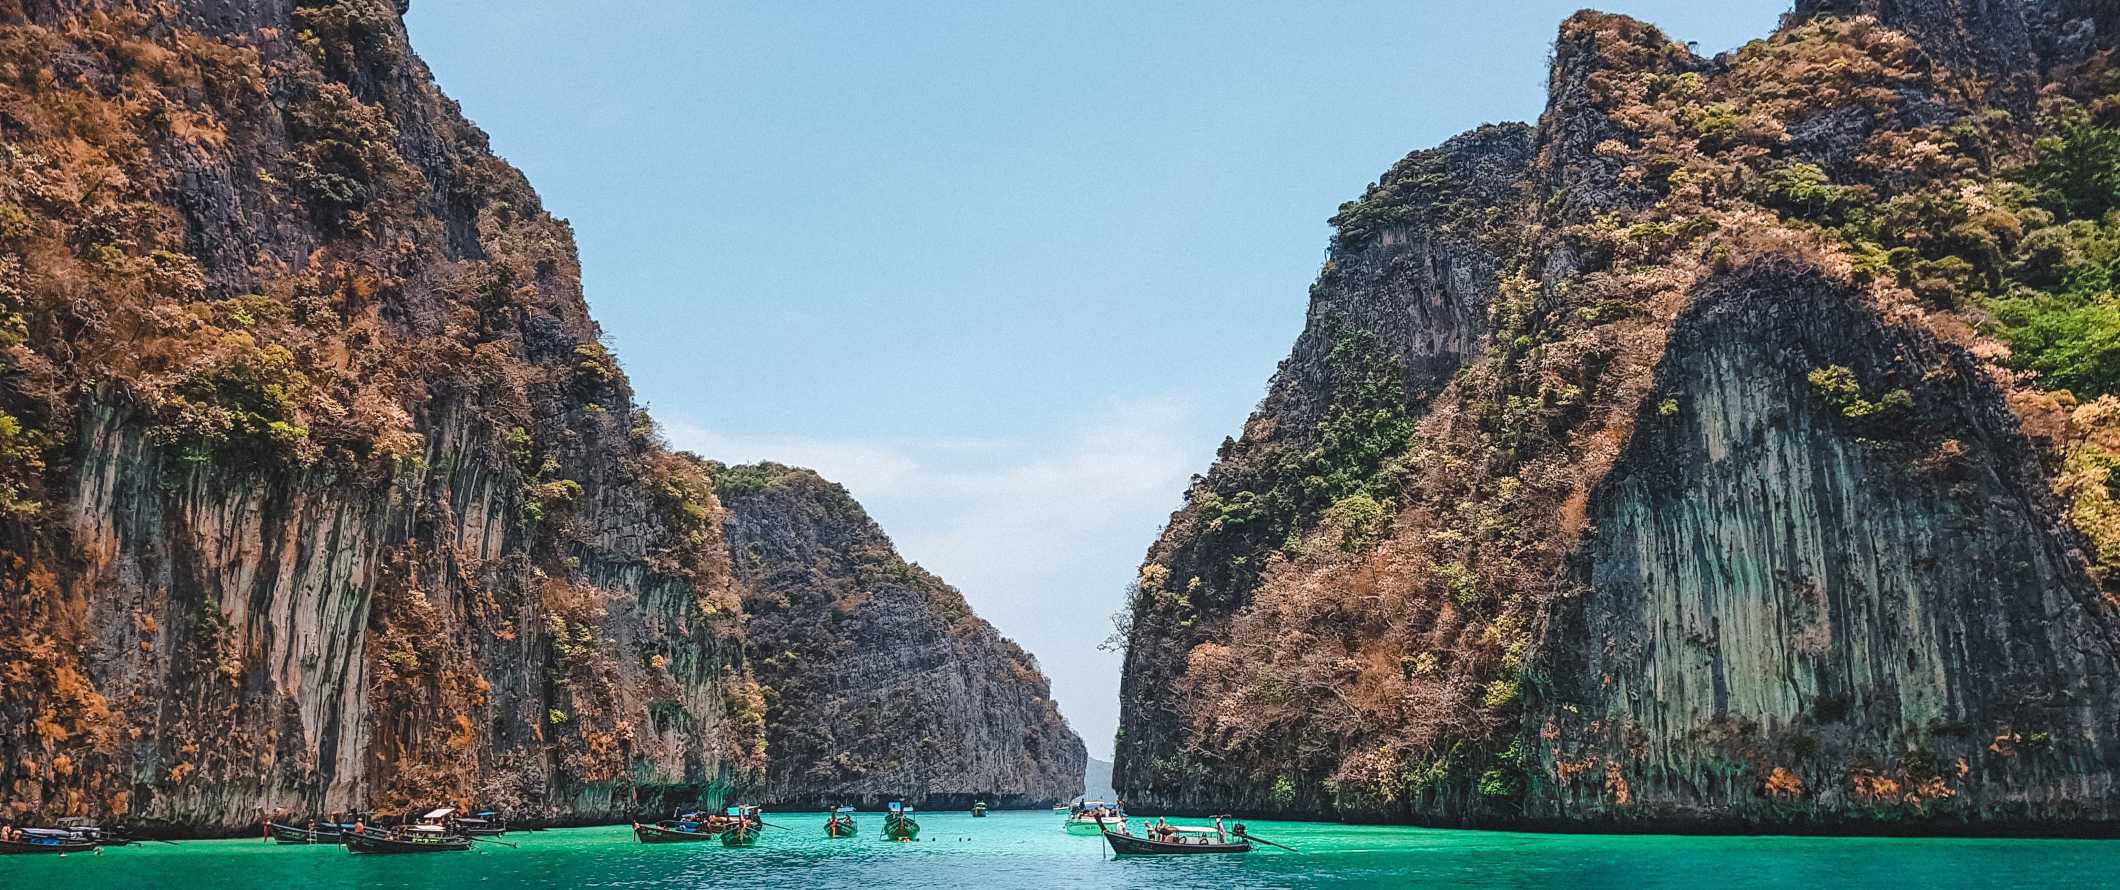 Boats in the water in front of huge limestone formations in Maya Bay on the island of Ko Phi Phi, Thailand